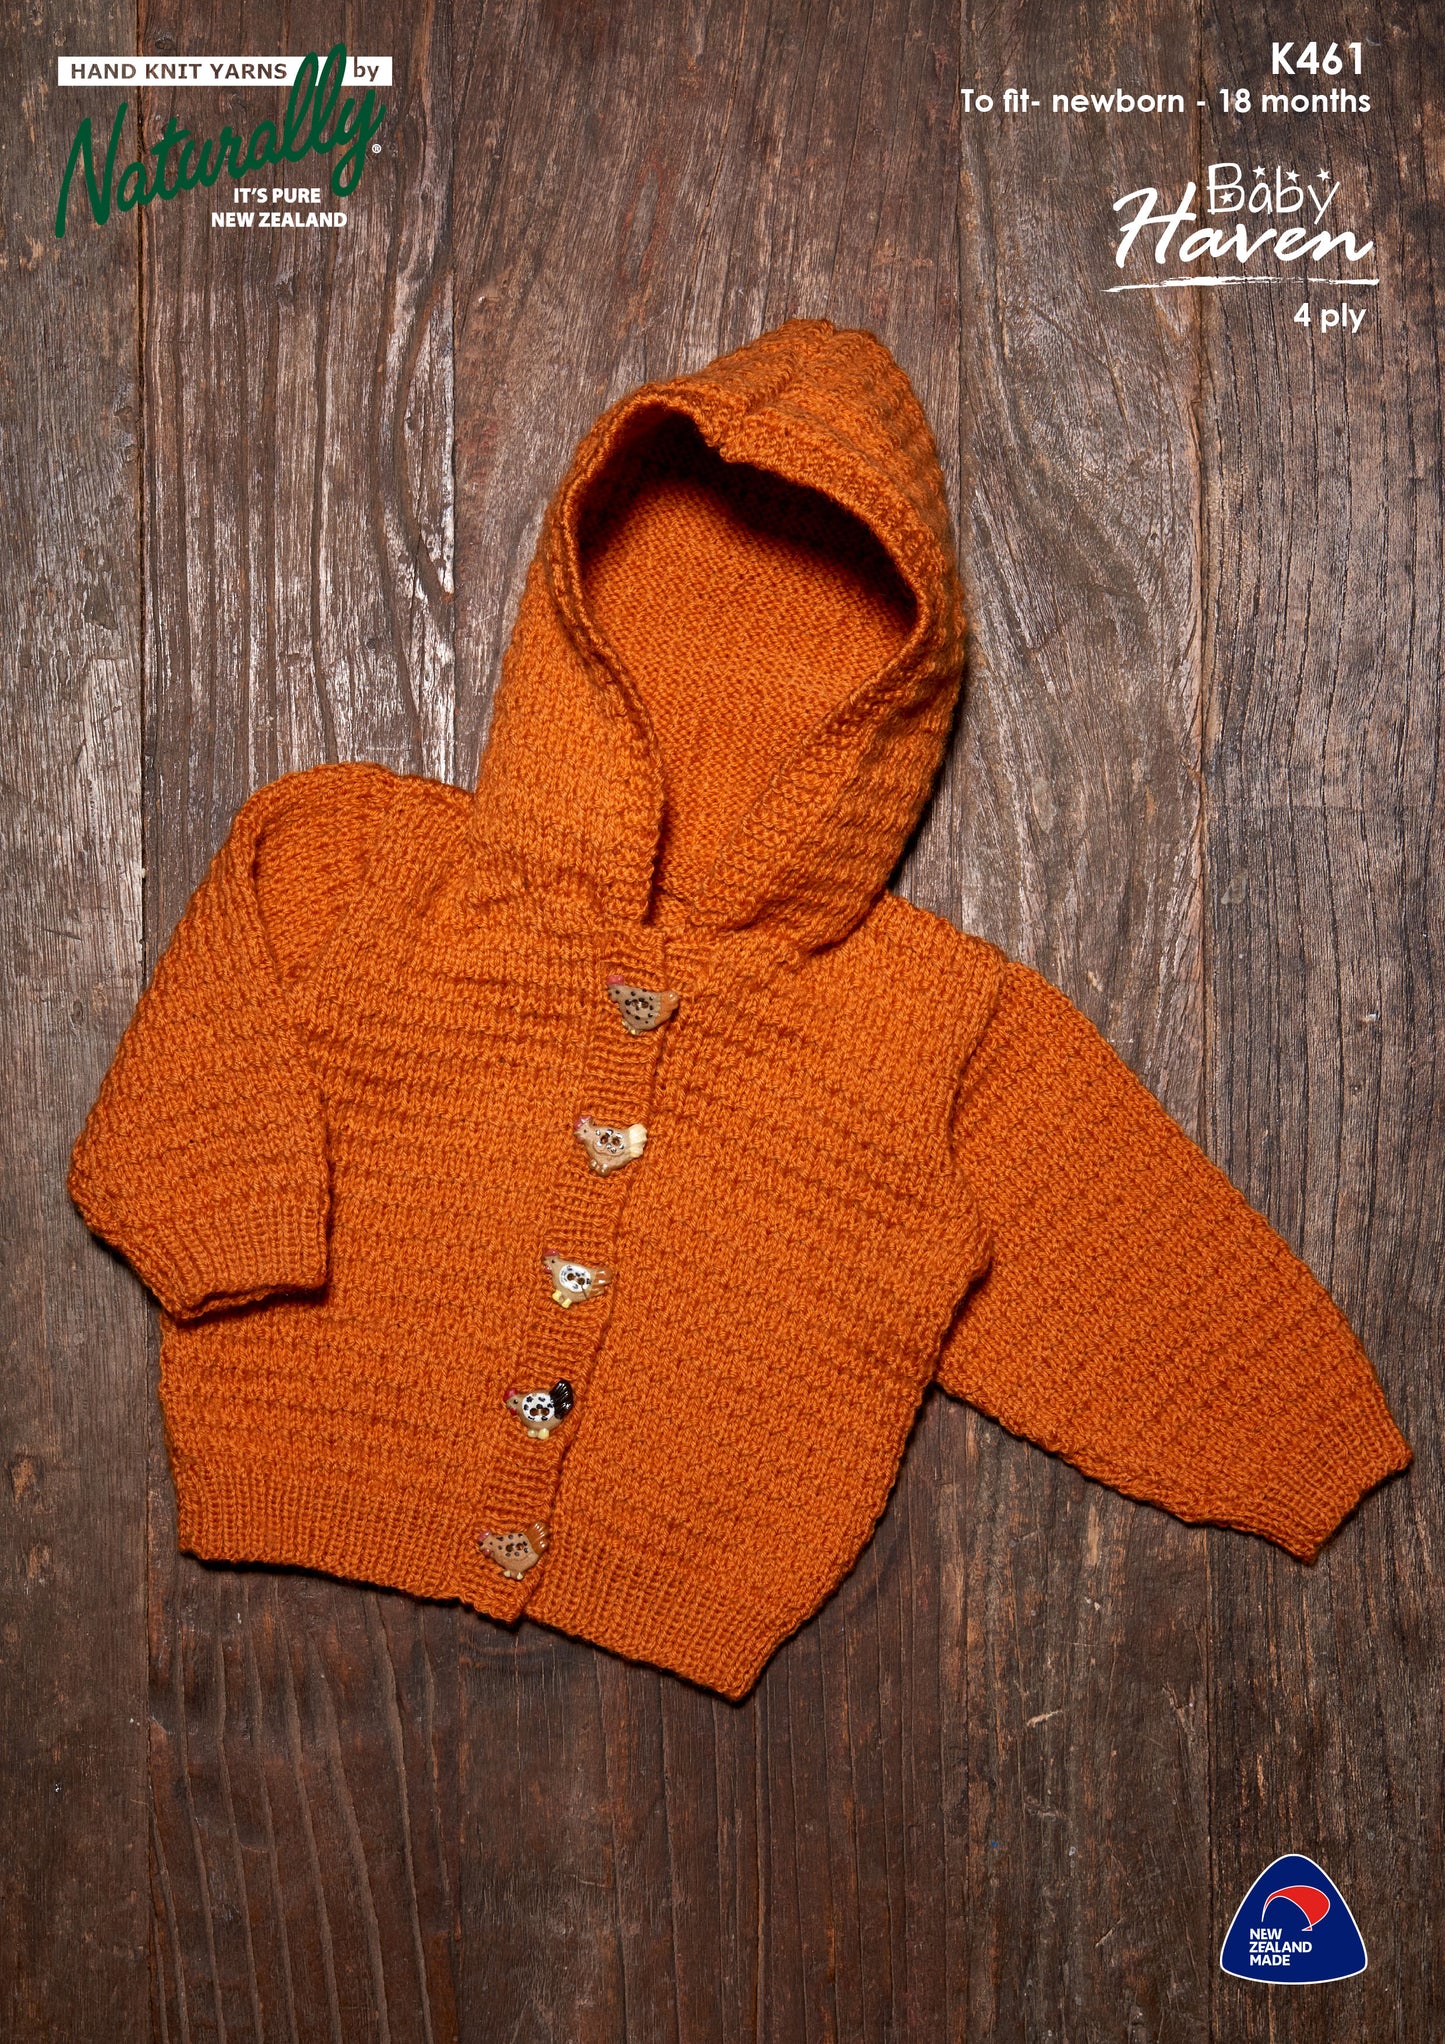 Pattern - Naturally - Newborn to 18 months - Hooded Jacket K461